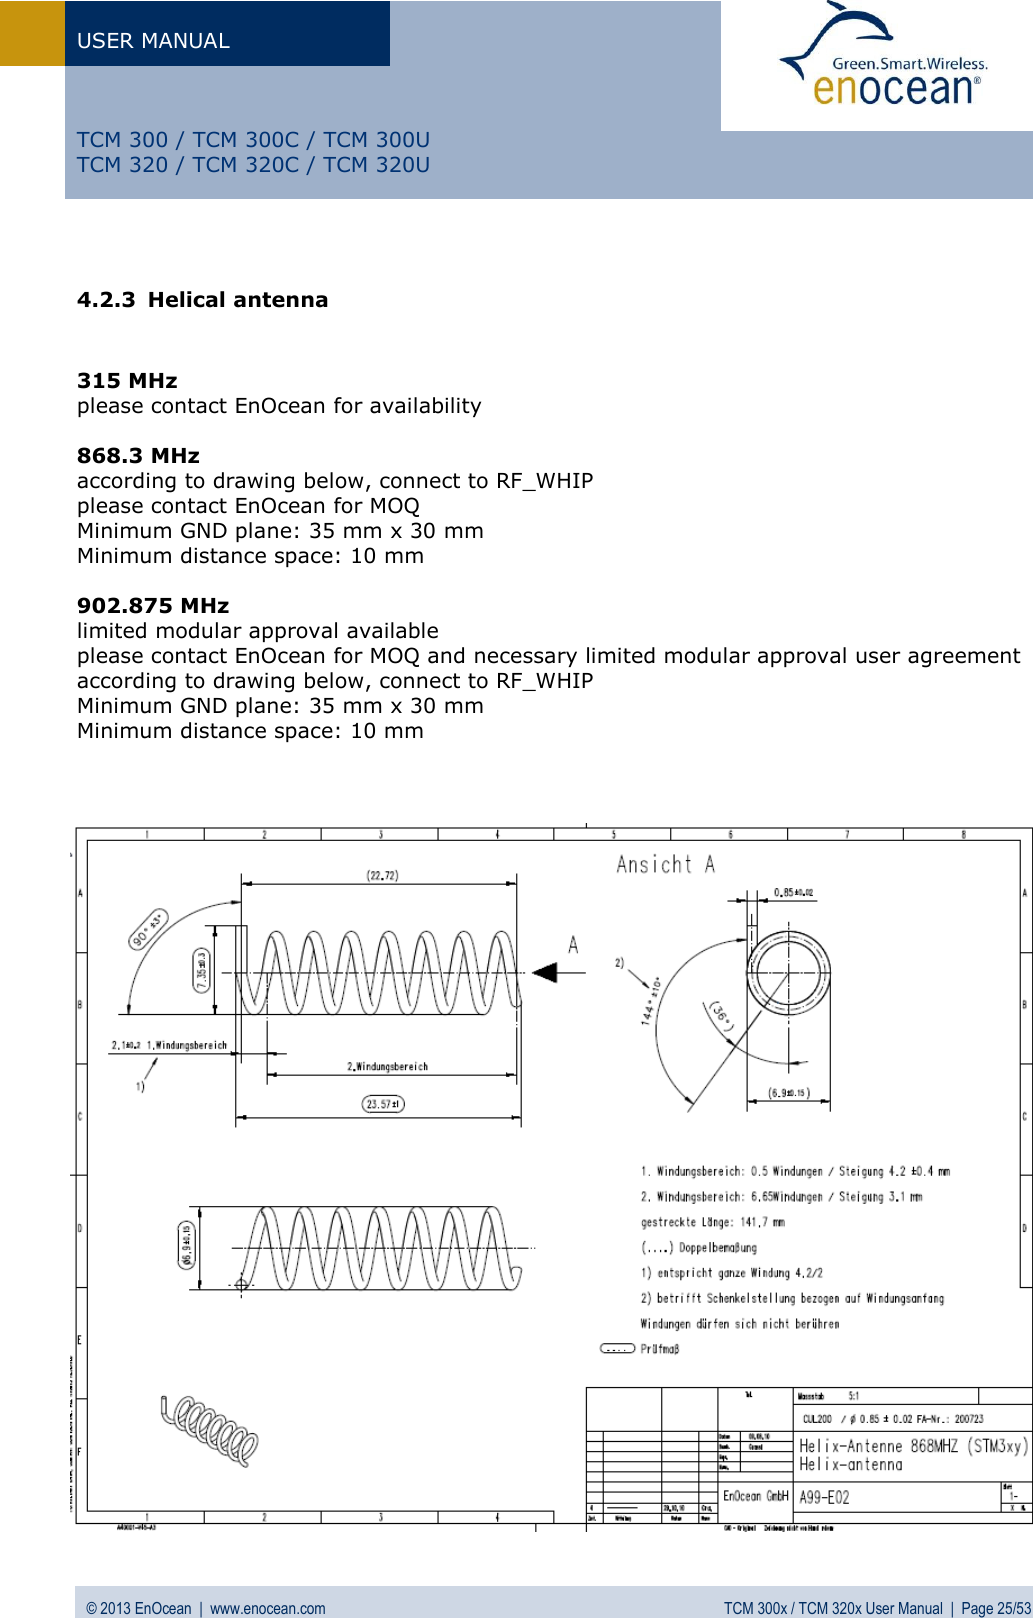 USER MANUAL   © 2013 EnOcean  |  www.enocean.com  TCM 300x / TCM 320x User Manual  |  Page 25/53   TCM 300 / TCM 300C / TCM 300U TCM 320 / TCM 320C / TCM 320U  4.2.3 Helical antenna   315 MHz please contact EnOcean for availability   868.3 MHz according to drawing below, connect to RF_WHIP  please contact EnOcean for MOQ Minimum GND plane: 35 mm x 30 mm Minimum distance space: 10 mm  902.875 MHz limited modular approval available please contact EnOcean for MOQ and necessary limited modular approval user agreement according to drawing below, connect to RF_WHIP Minimum GND plane: 35 mm x 30 mm Minimum distance space: 10 mm                                